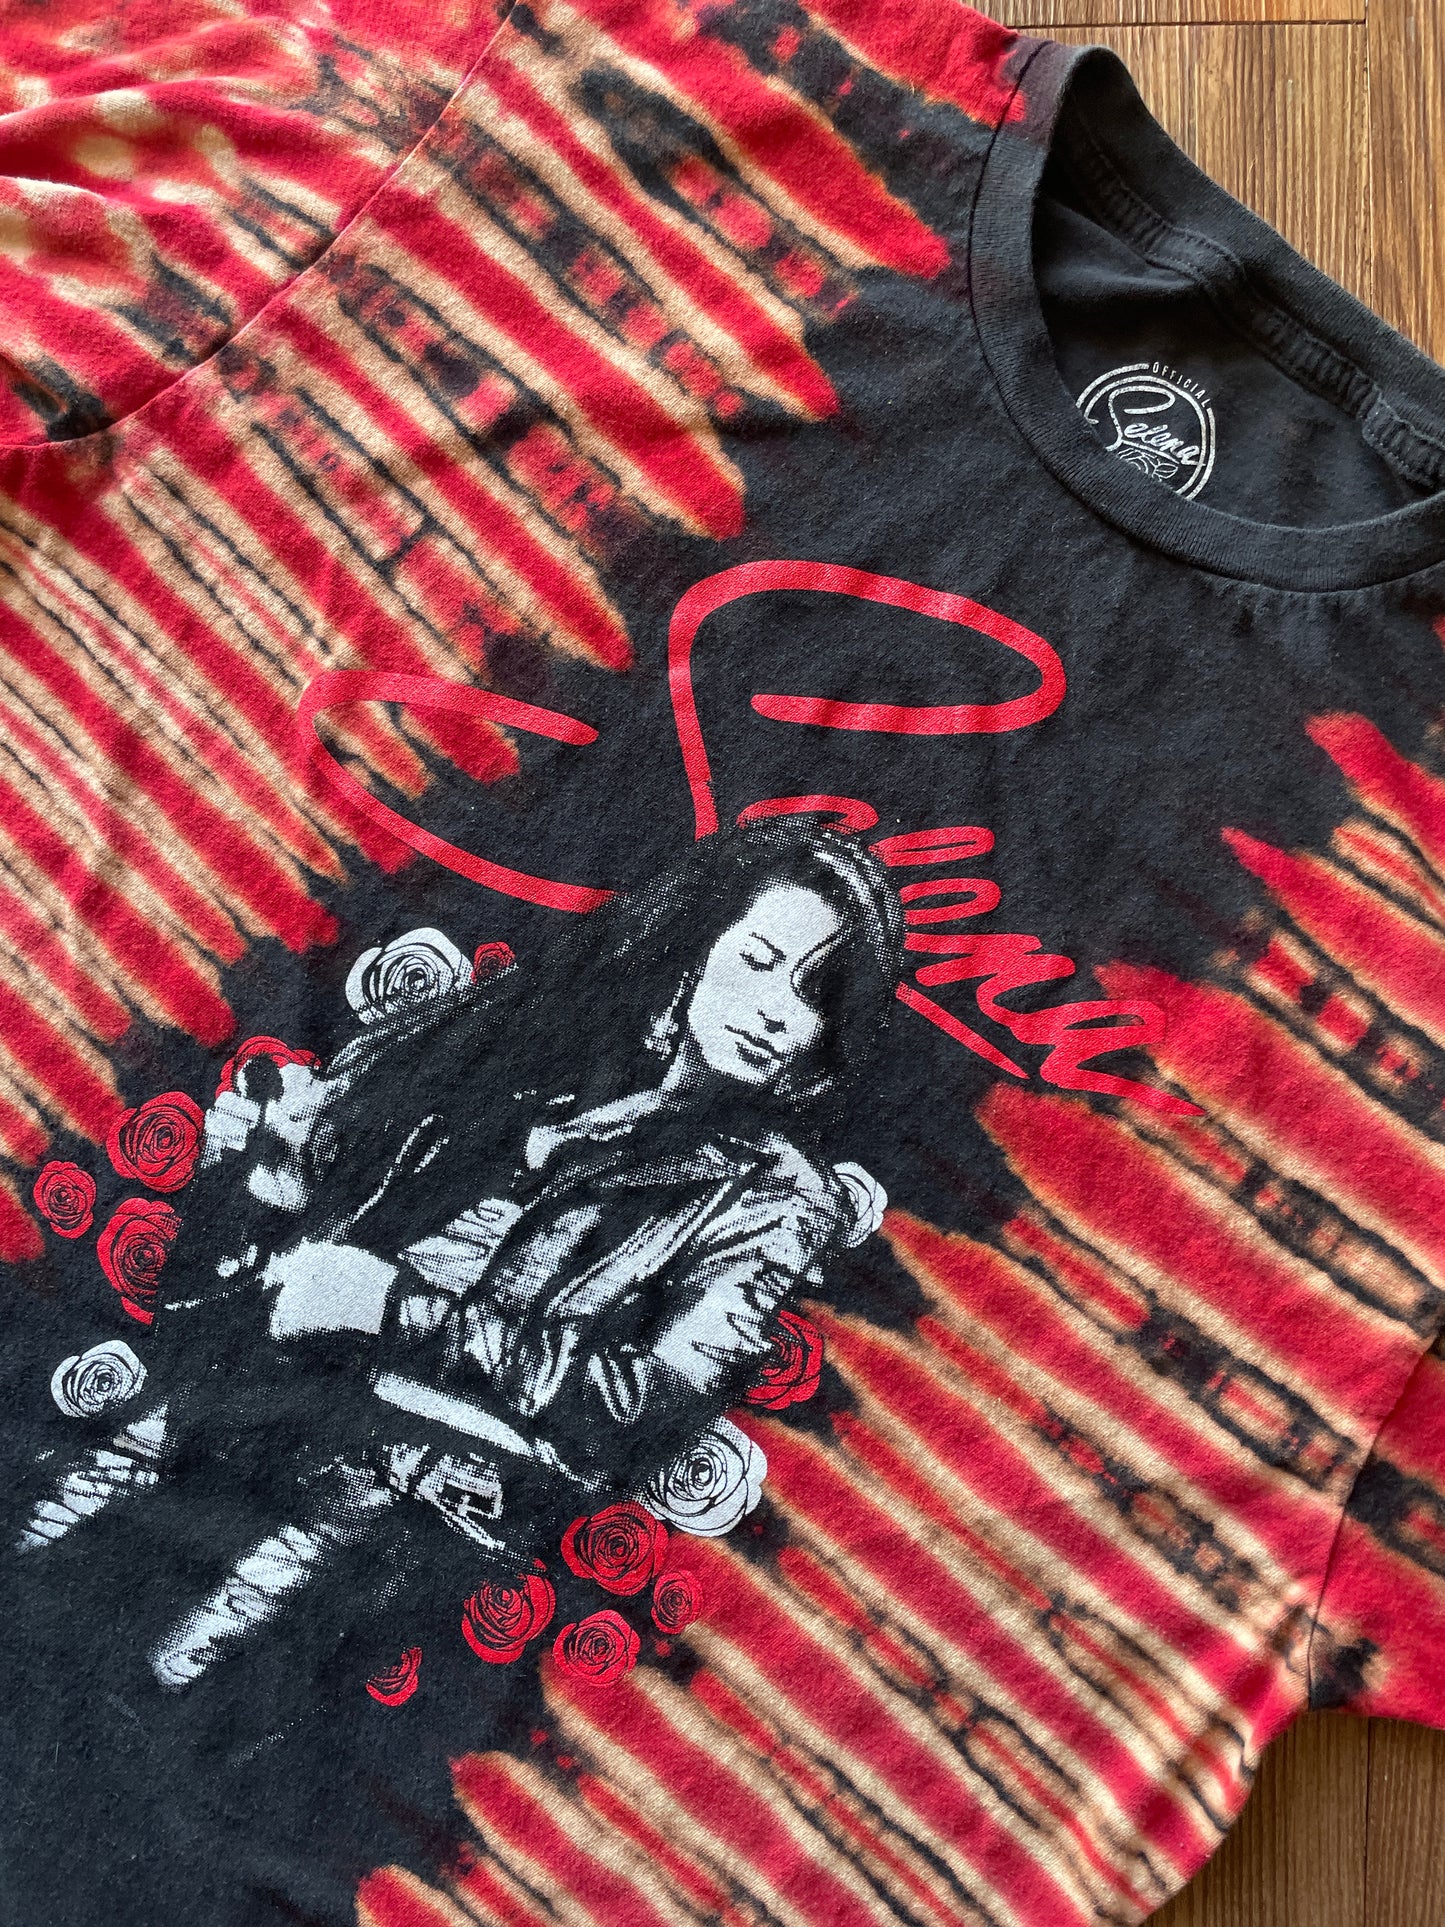 LARGE Men’s Selena Red Roses Handmade Tie Dye T-Shirt | One-Of-a-Kind Black and Red Short Sleeve